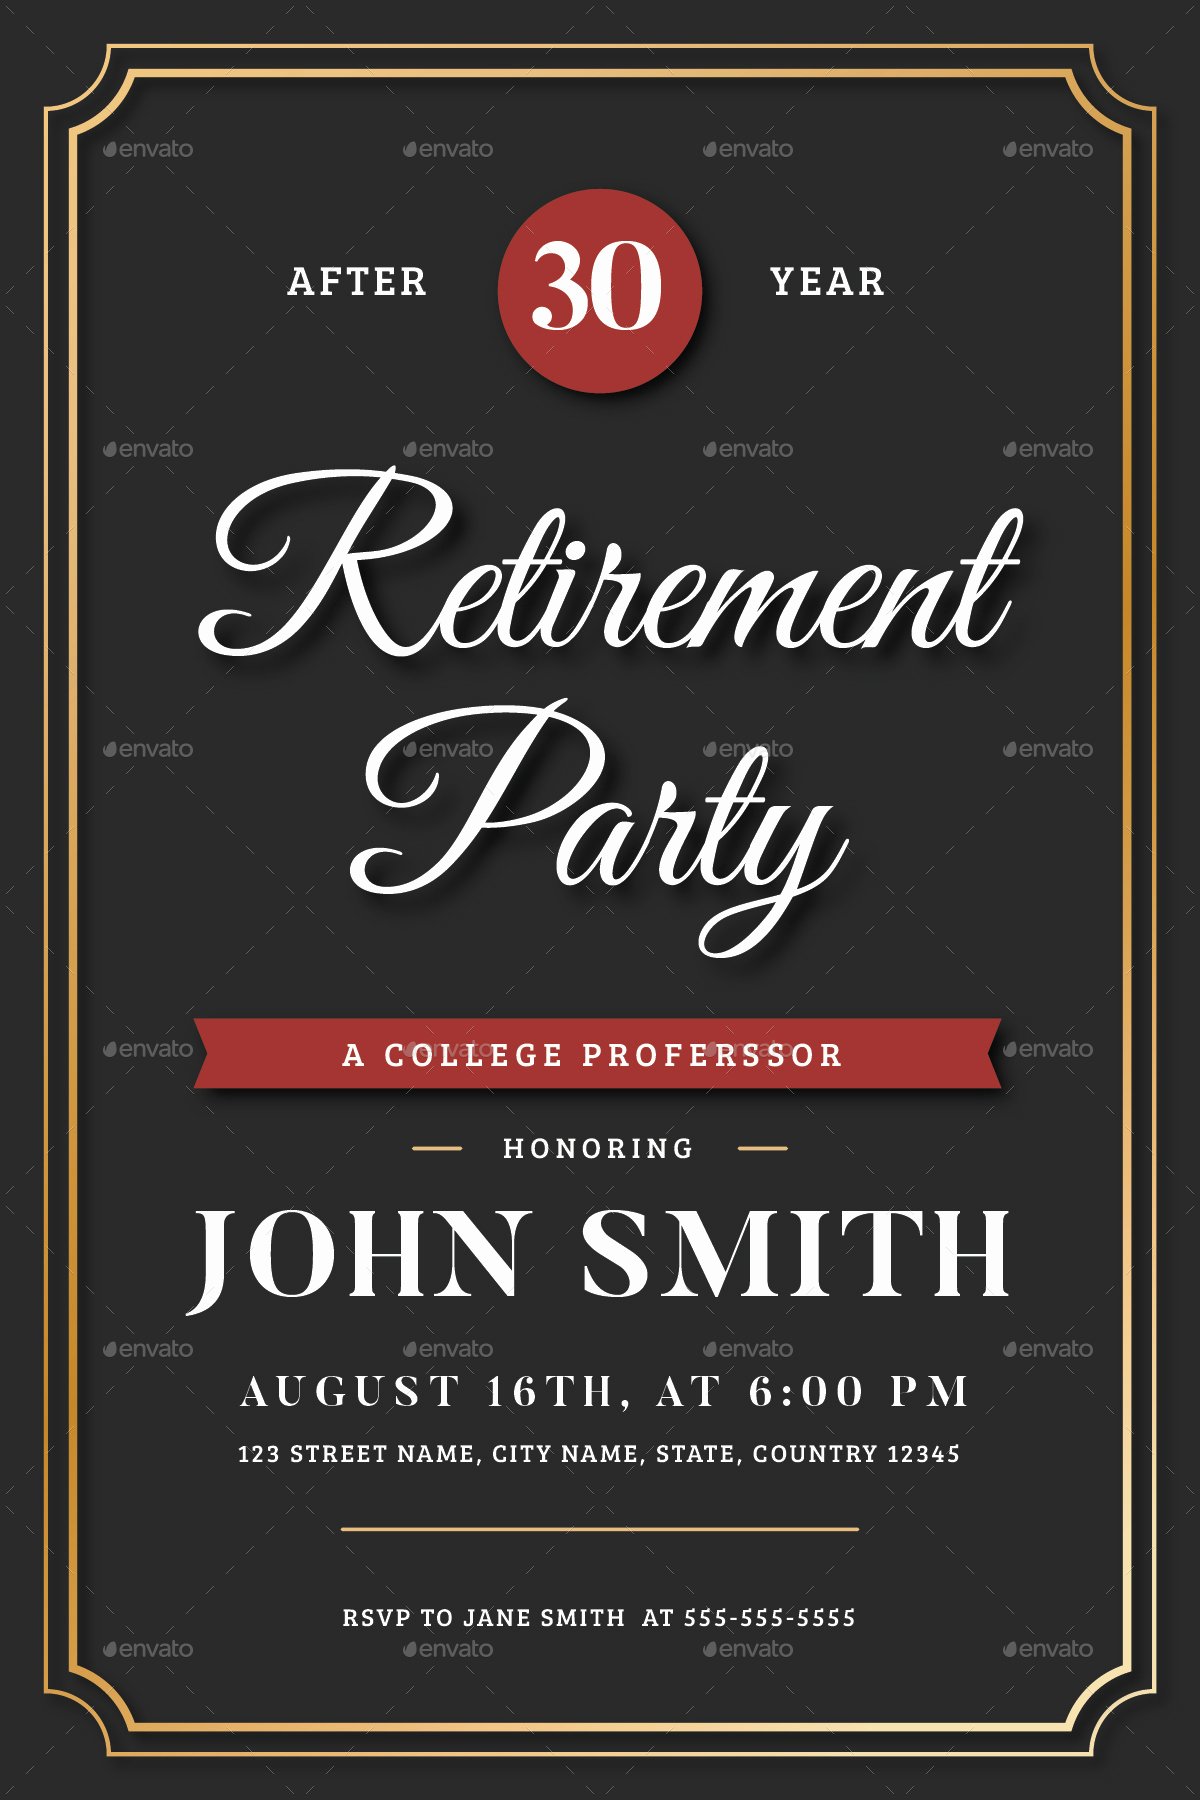 Retirement Party Flyer Templates Free Best Of Retirement Invitation Flyer Templates by Vynetta